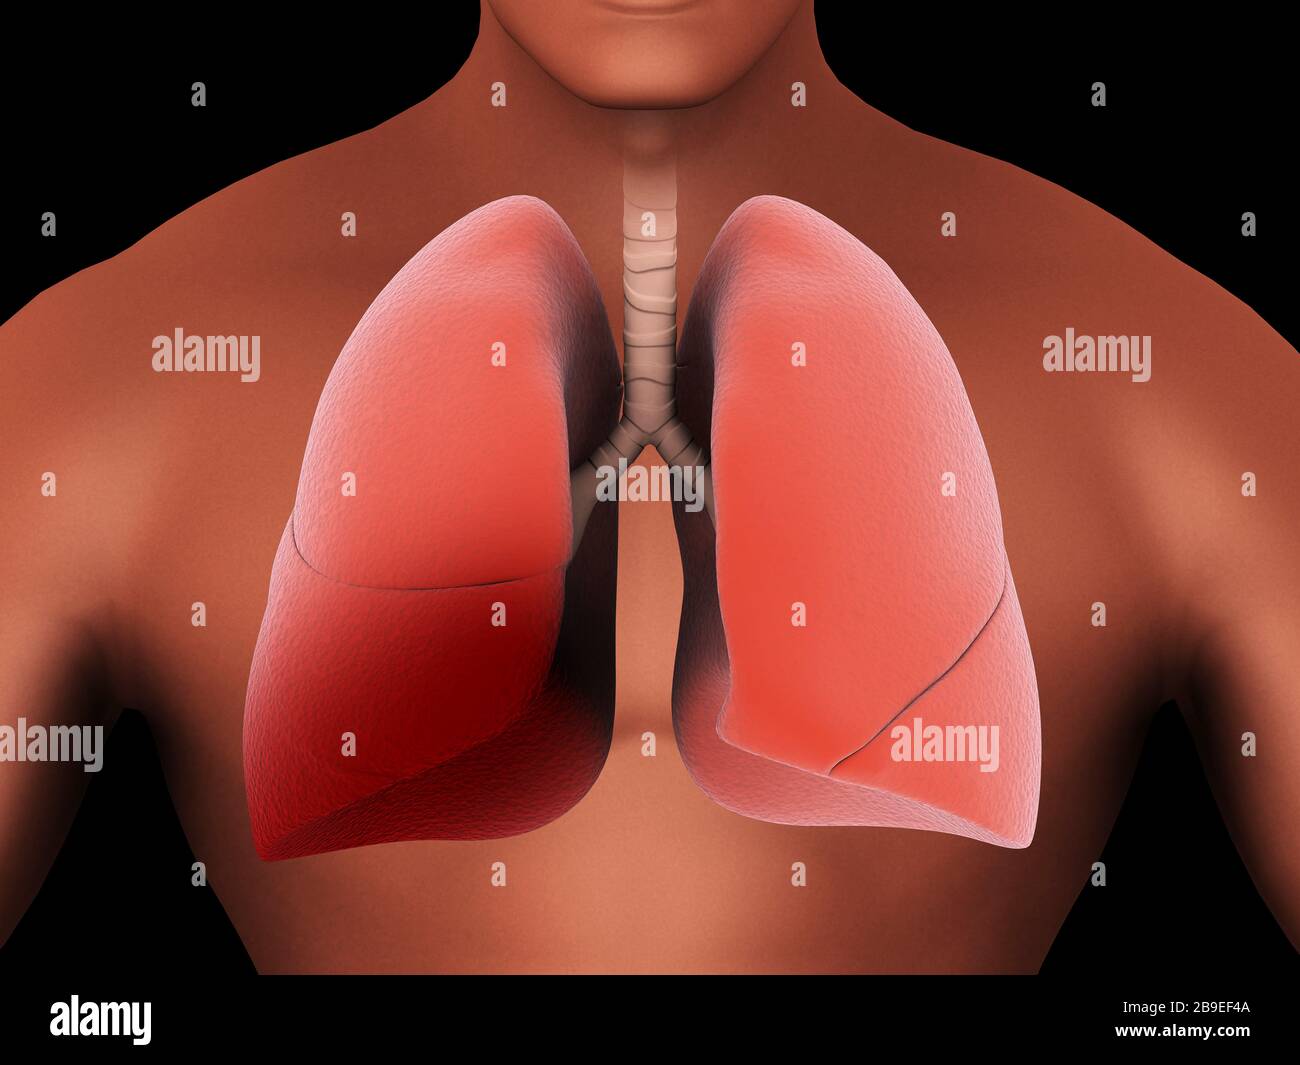 Inflammation in the human lungs caused by pneumonia. Stock Photo